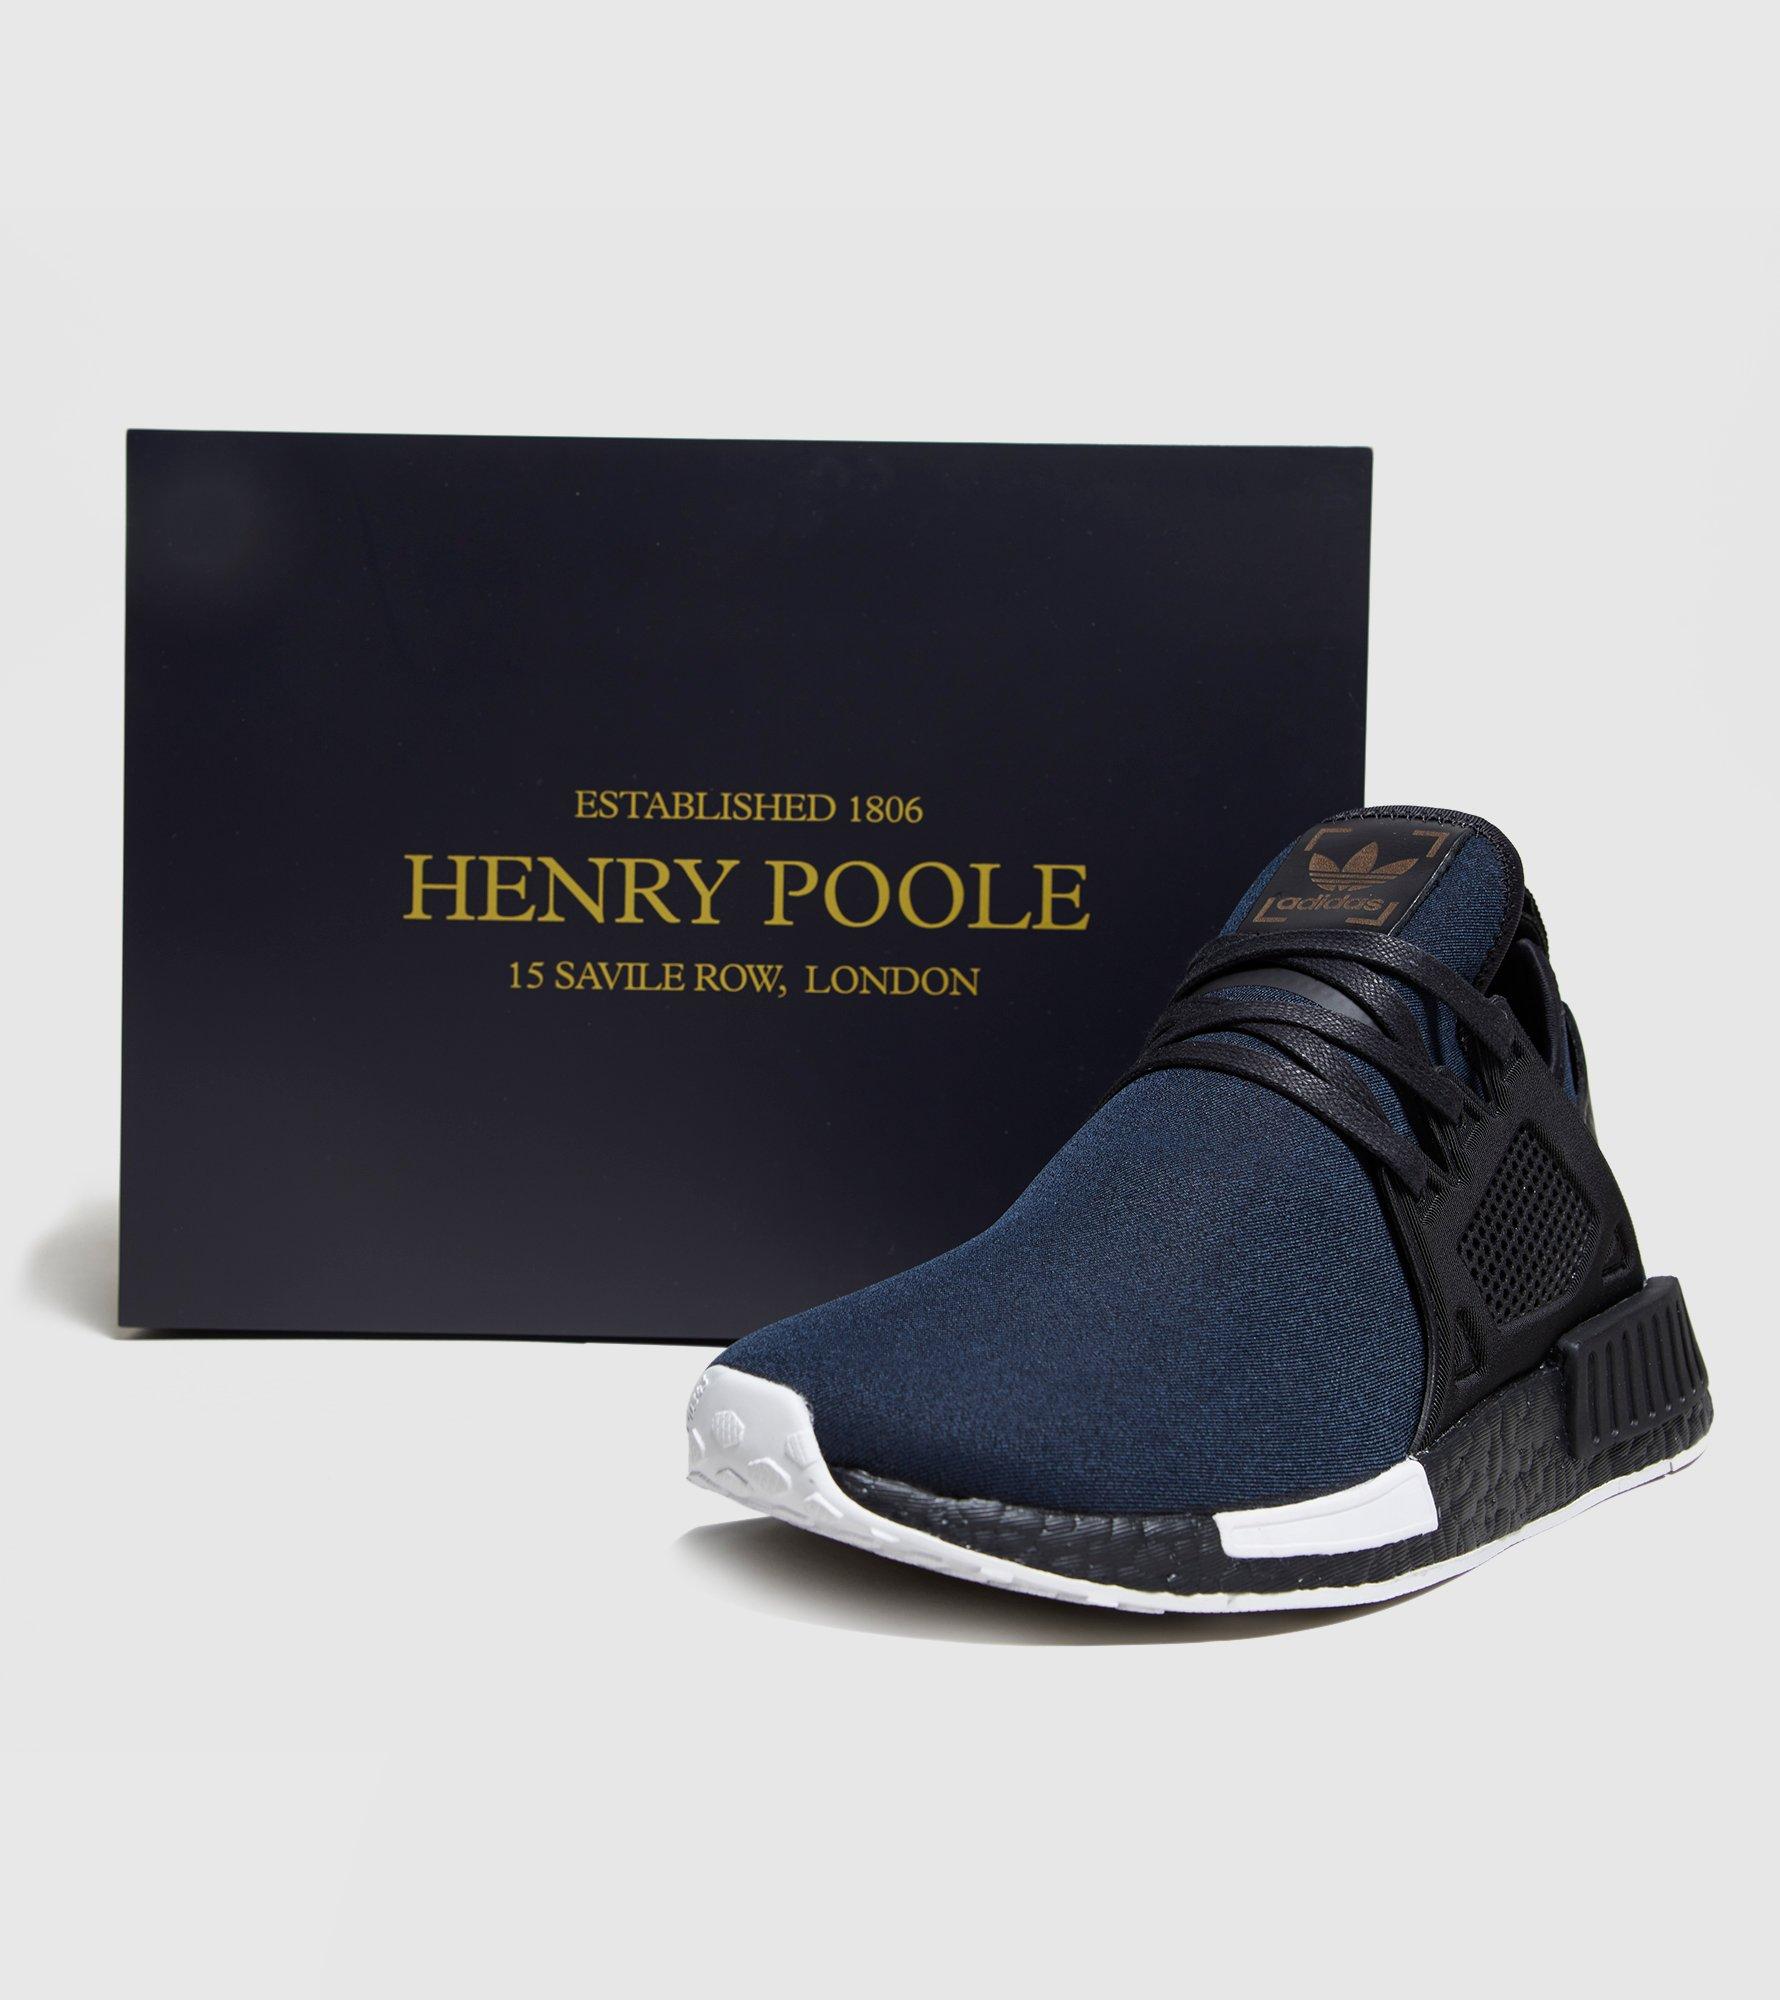 Adidas nmd xr1 henry poole Men 's Fashio.Carousell